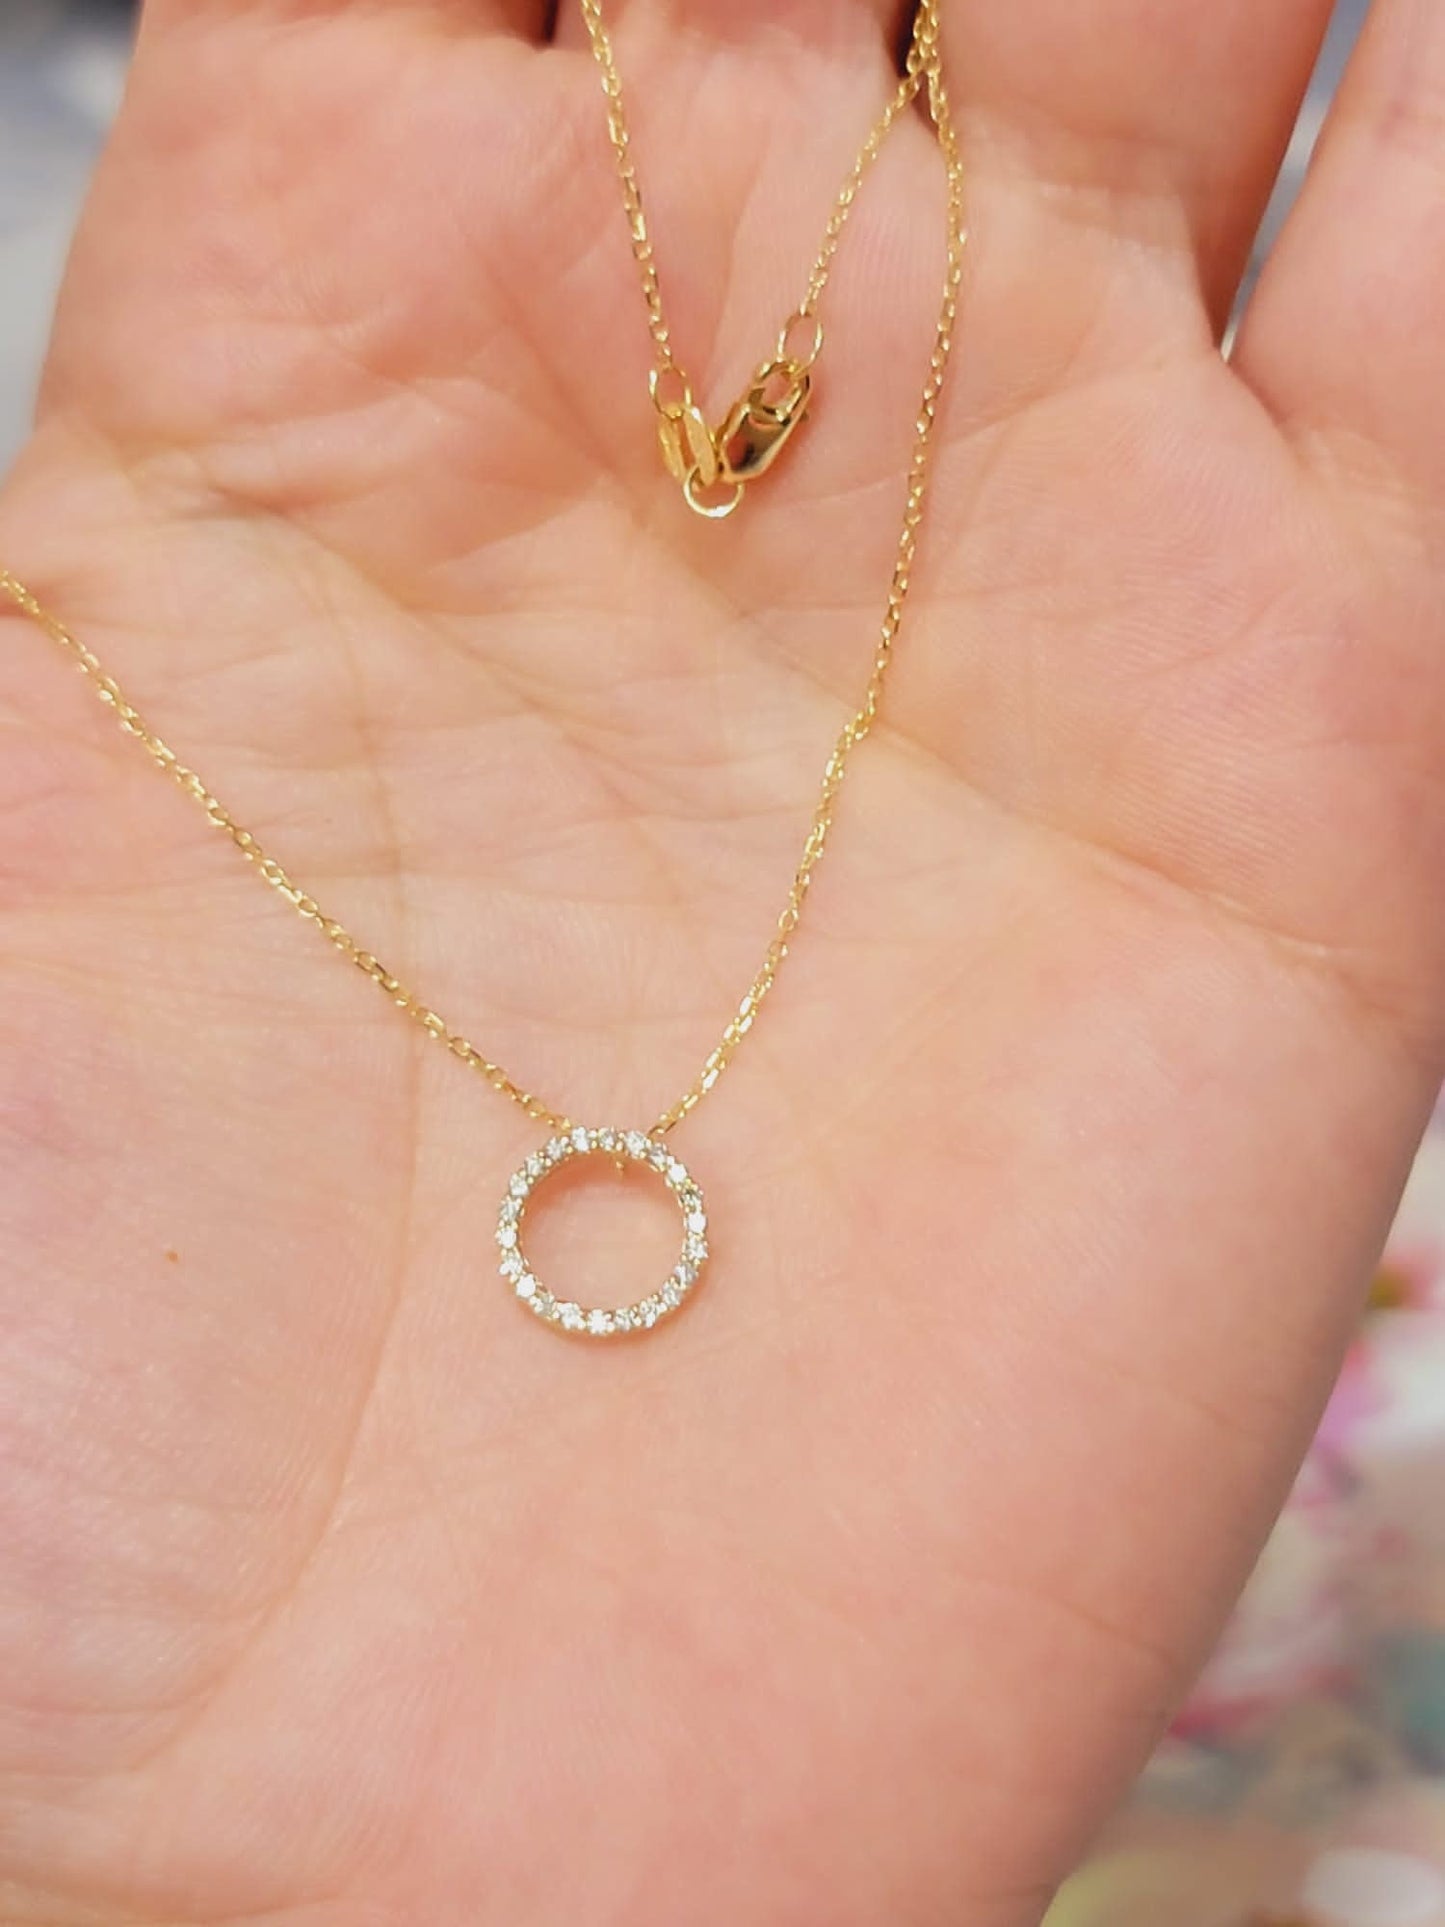 Tiny Diamond Necklace, Cluster Diamond Pendant, Open Circle Diamond Pendant, Diamond Circle Of life necklace in 14k Solid Gold